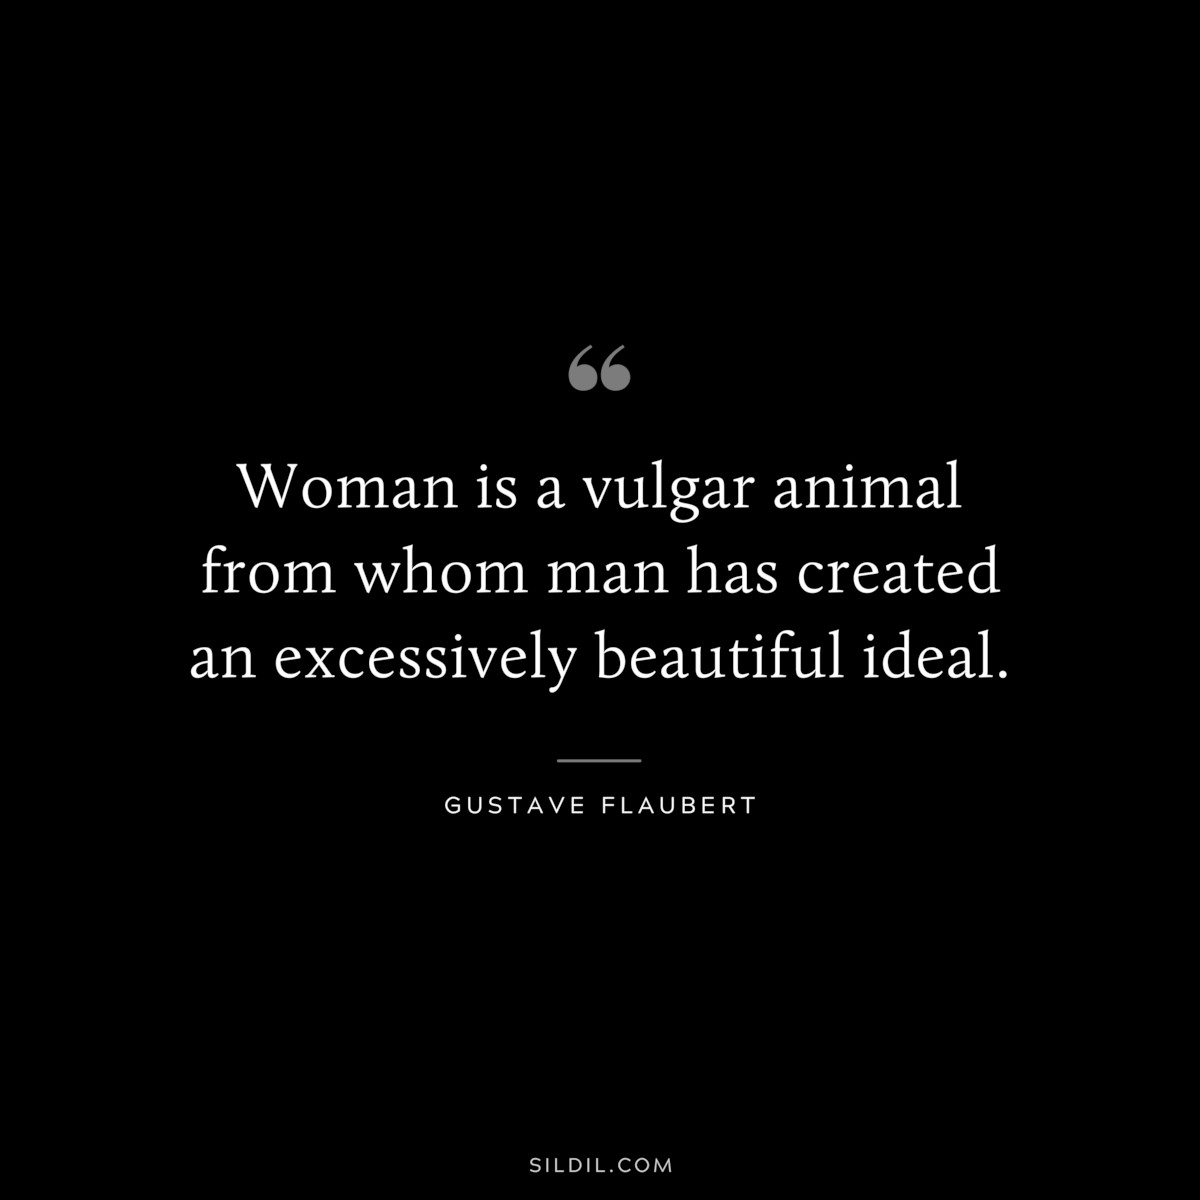 Woman is a vulgar animal from whom man has created an excessively beautiful ideal. ― Gustave Flaubert